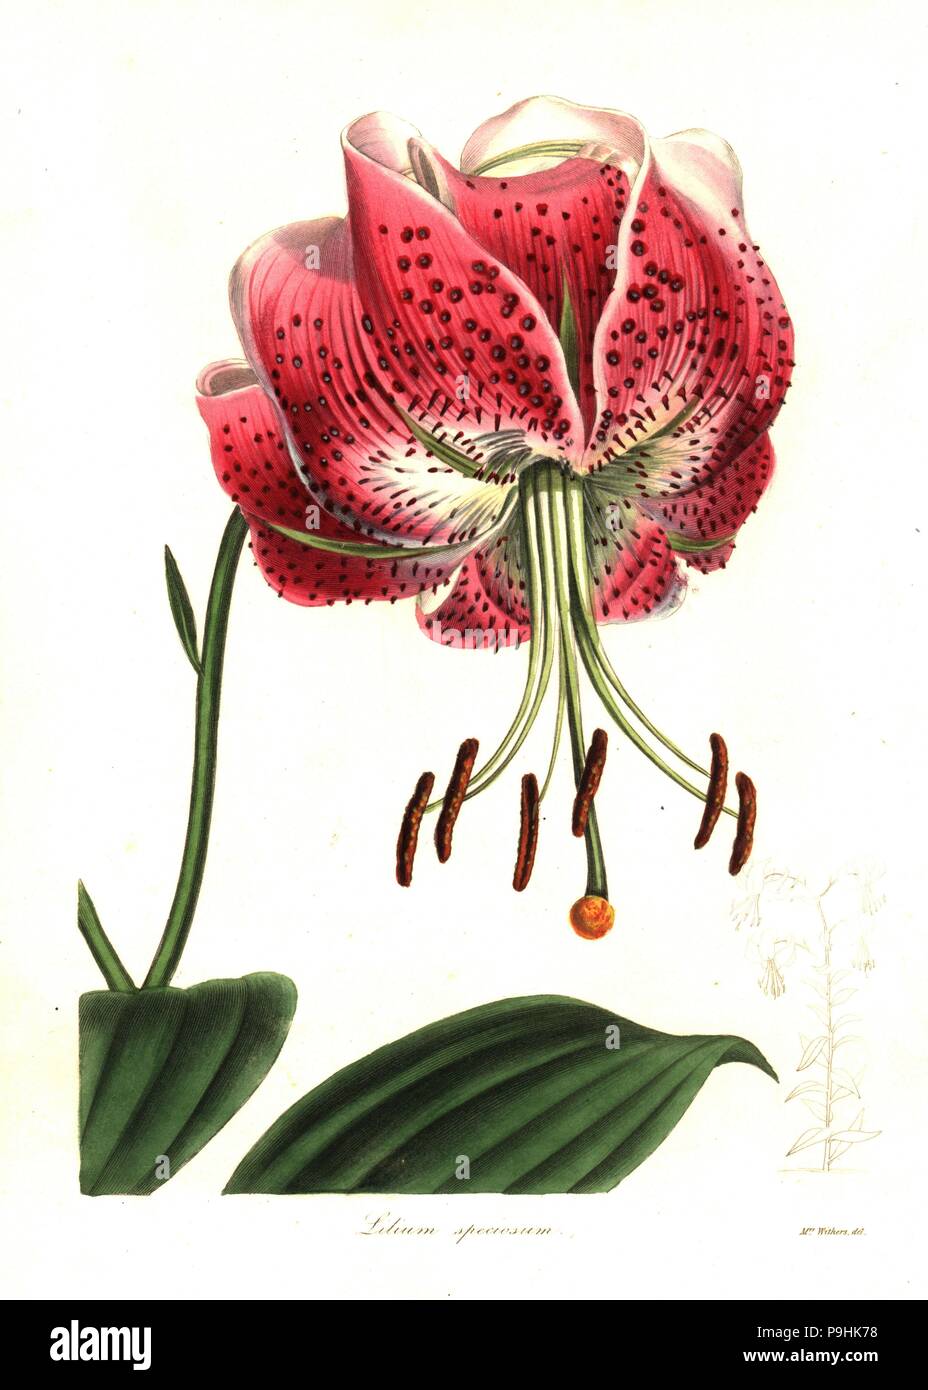 Shewy lily, Lilium speciosum. Handcoloured copperplate engraving after a botanical illustration by Mrs Augusta Withers from Benjamin Maund and the Rev. John Stevens Henslow's The Botanist, London, 1836. Stock Photo